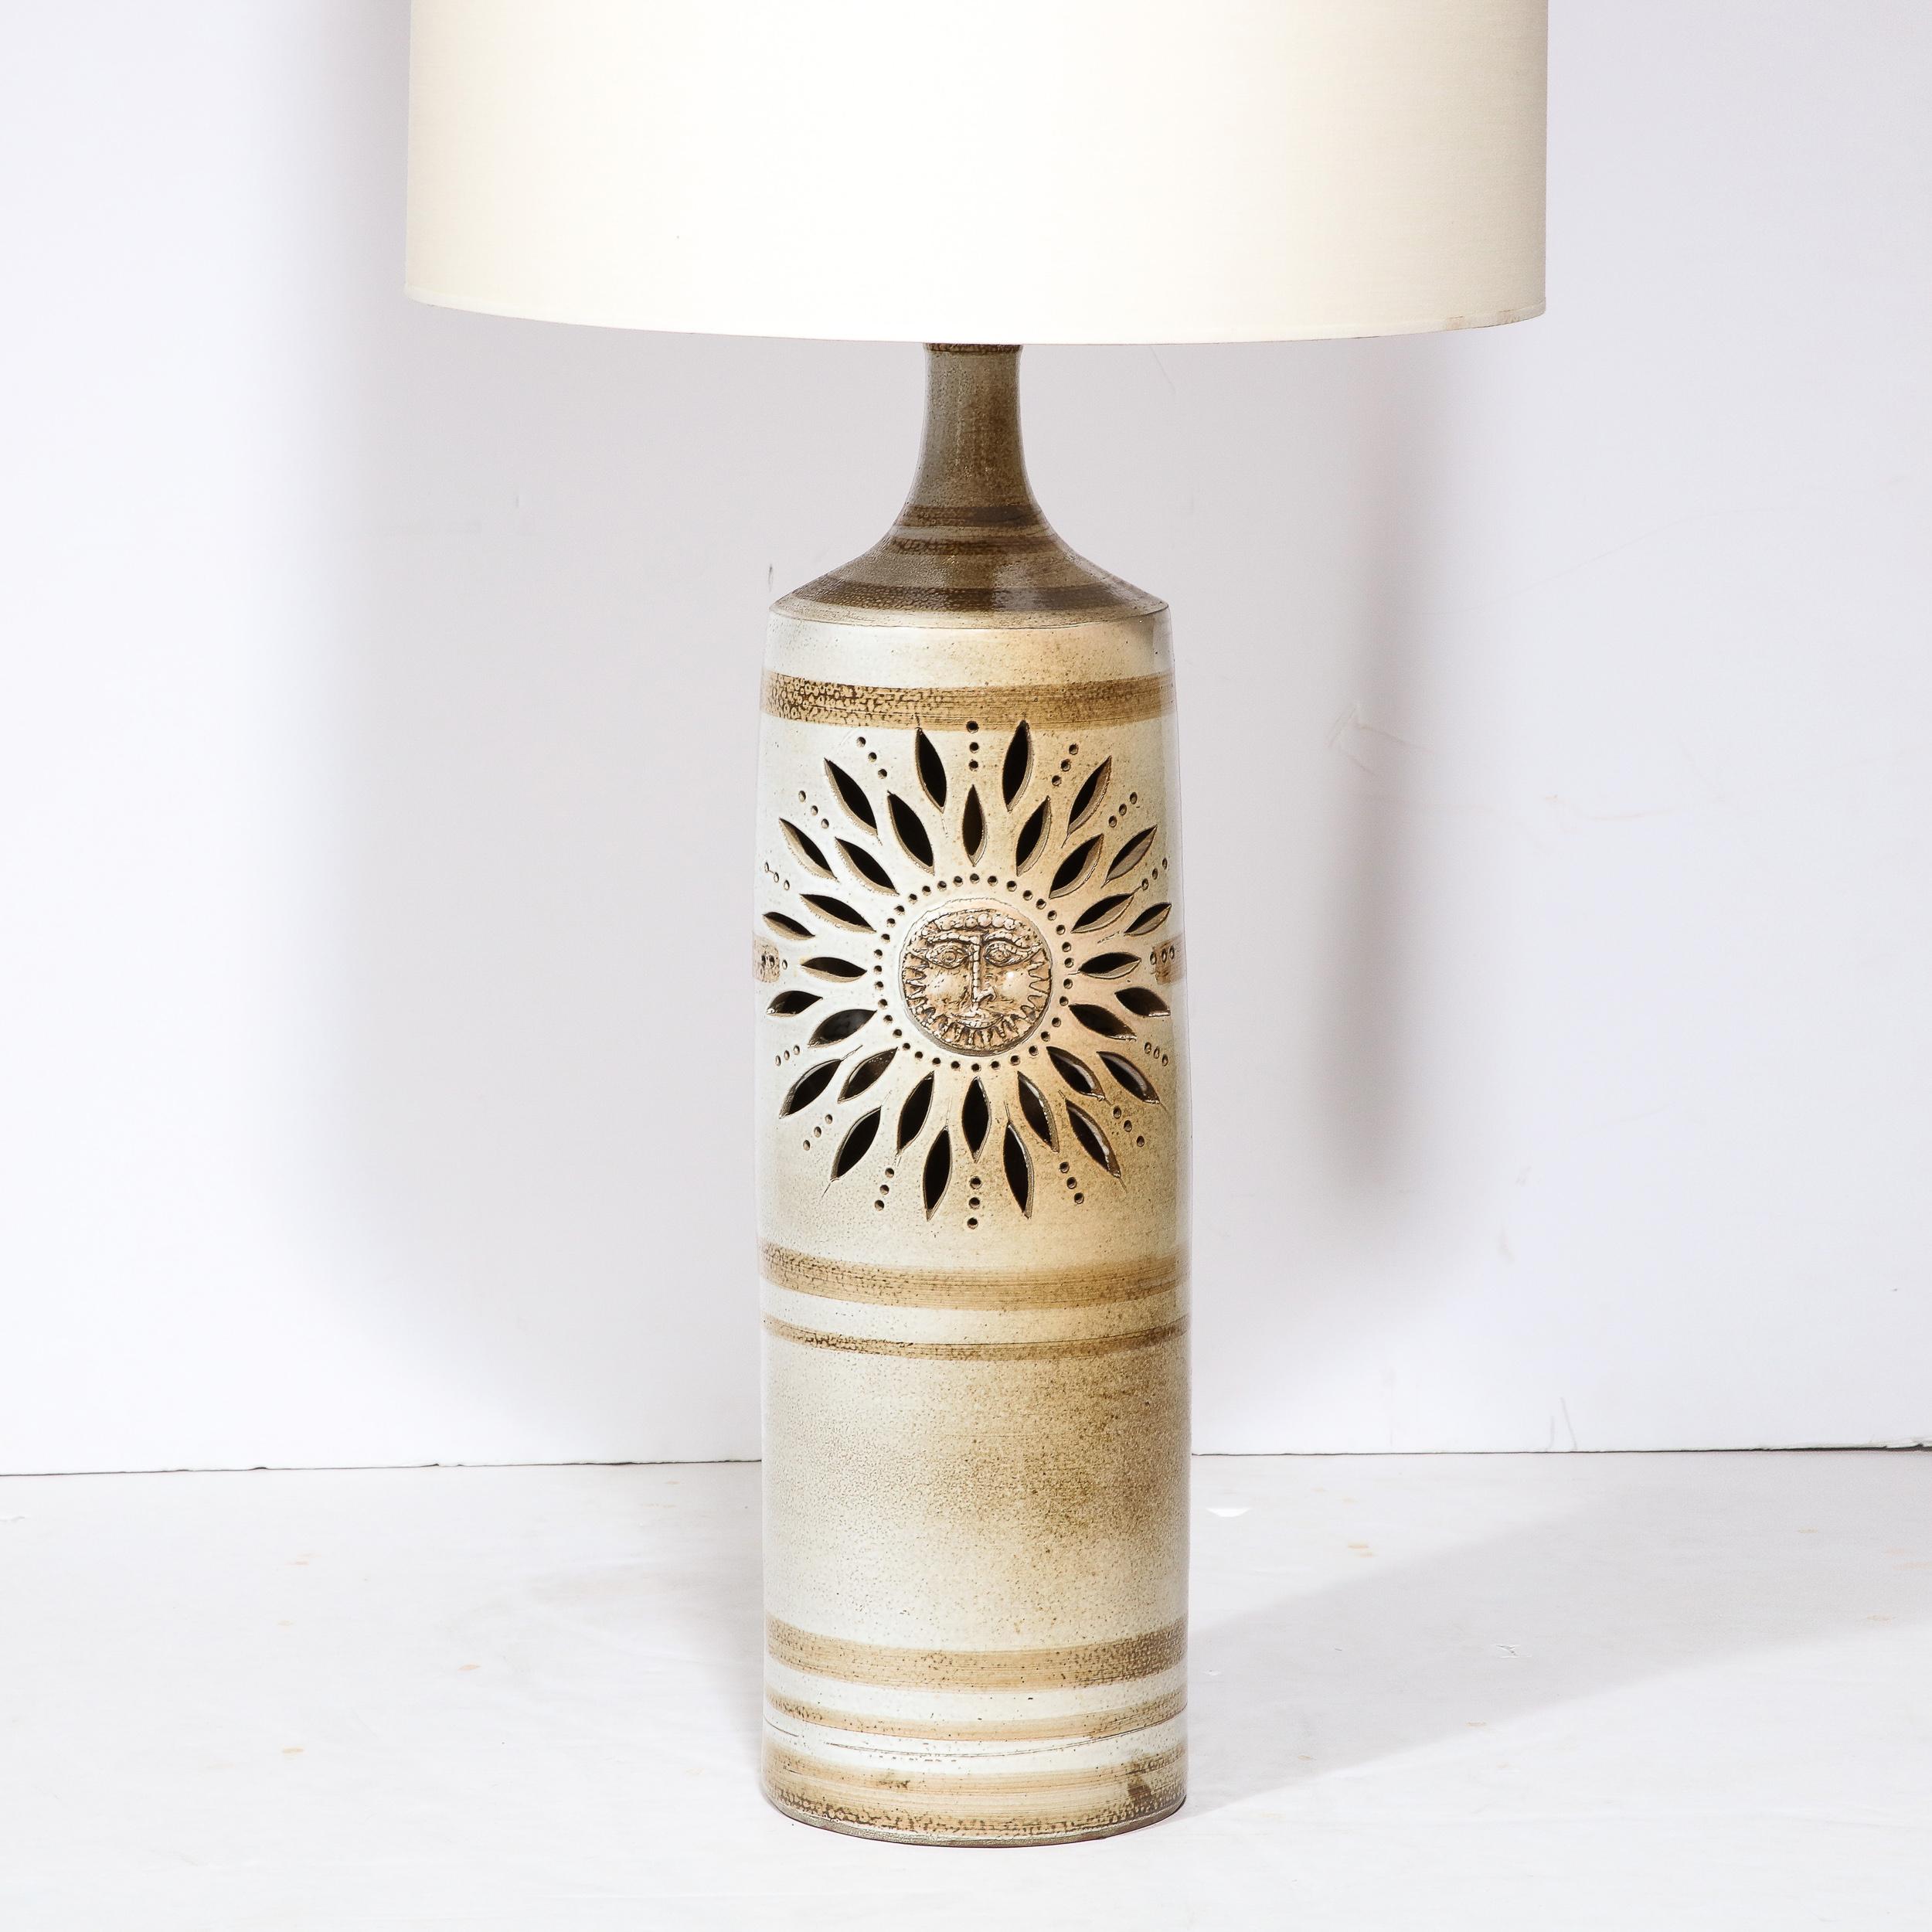 Mid-Century Modern Midcentury Ceramic Hand Painted Floral Sun Motif Table Lamp by Pierre Pissareff For Sale